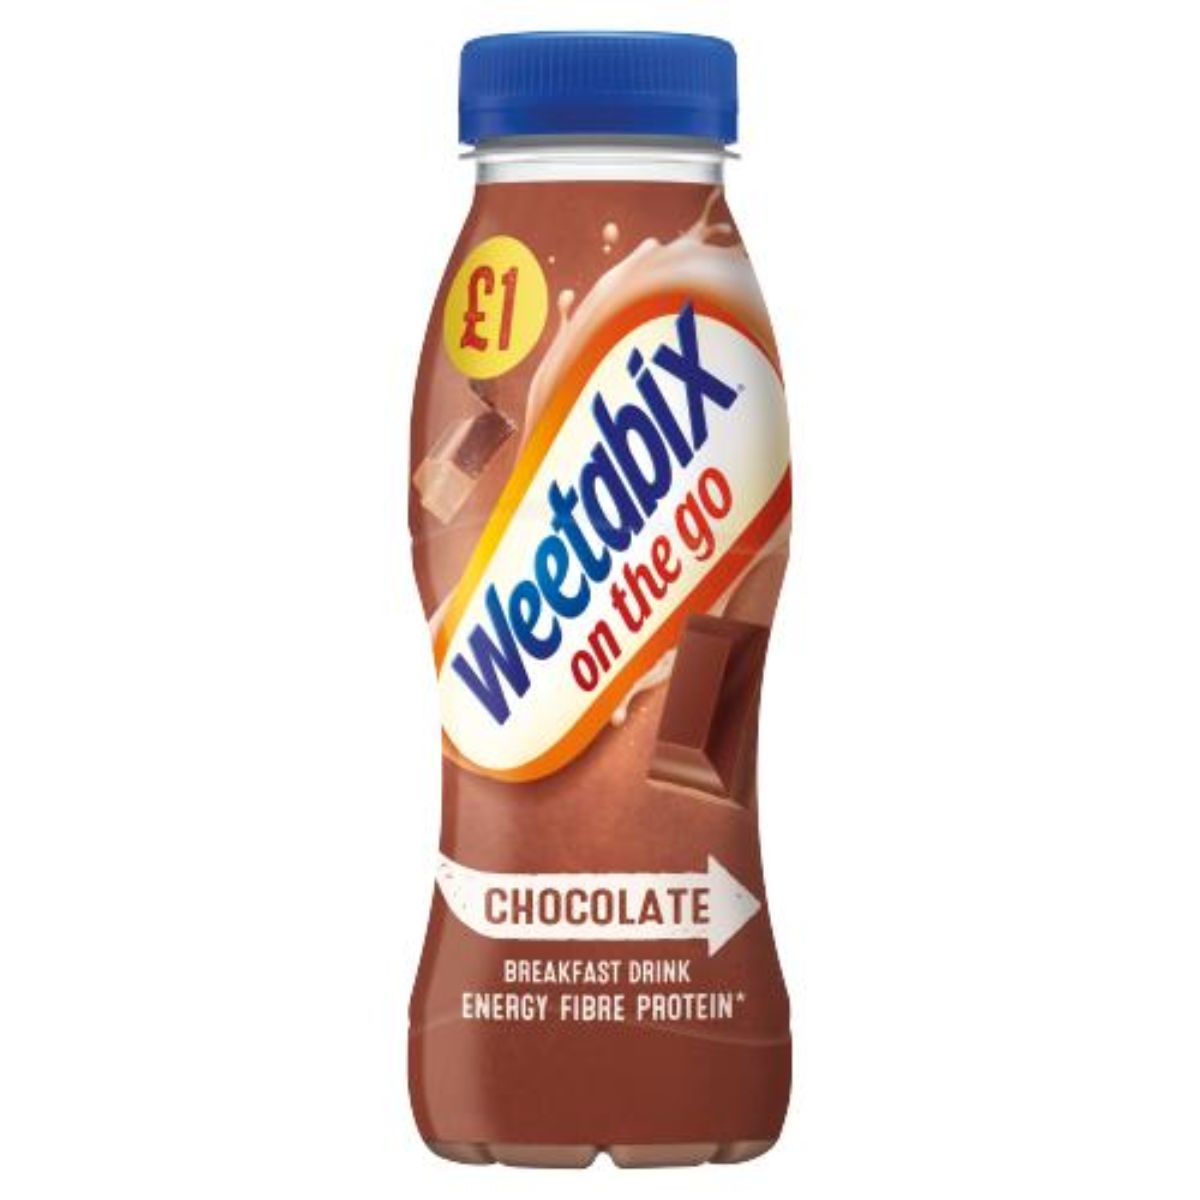 A bottle of Weetabix - On the Go Chocolate Breakfast Drink - 250ml.